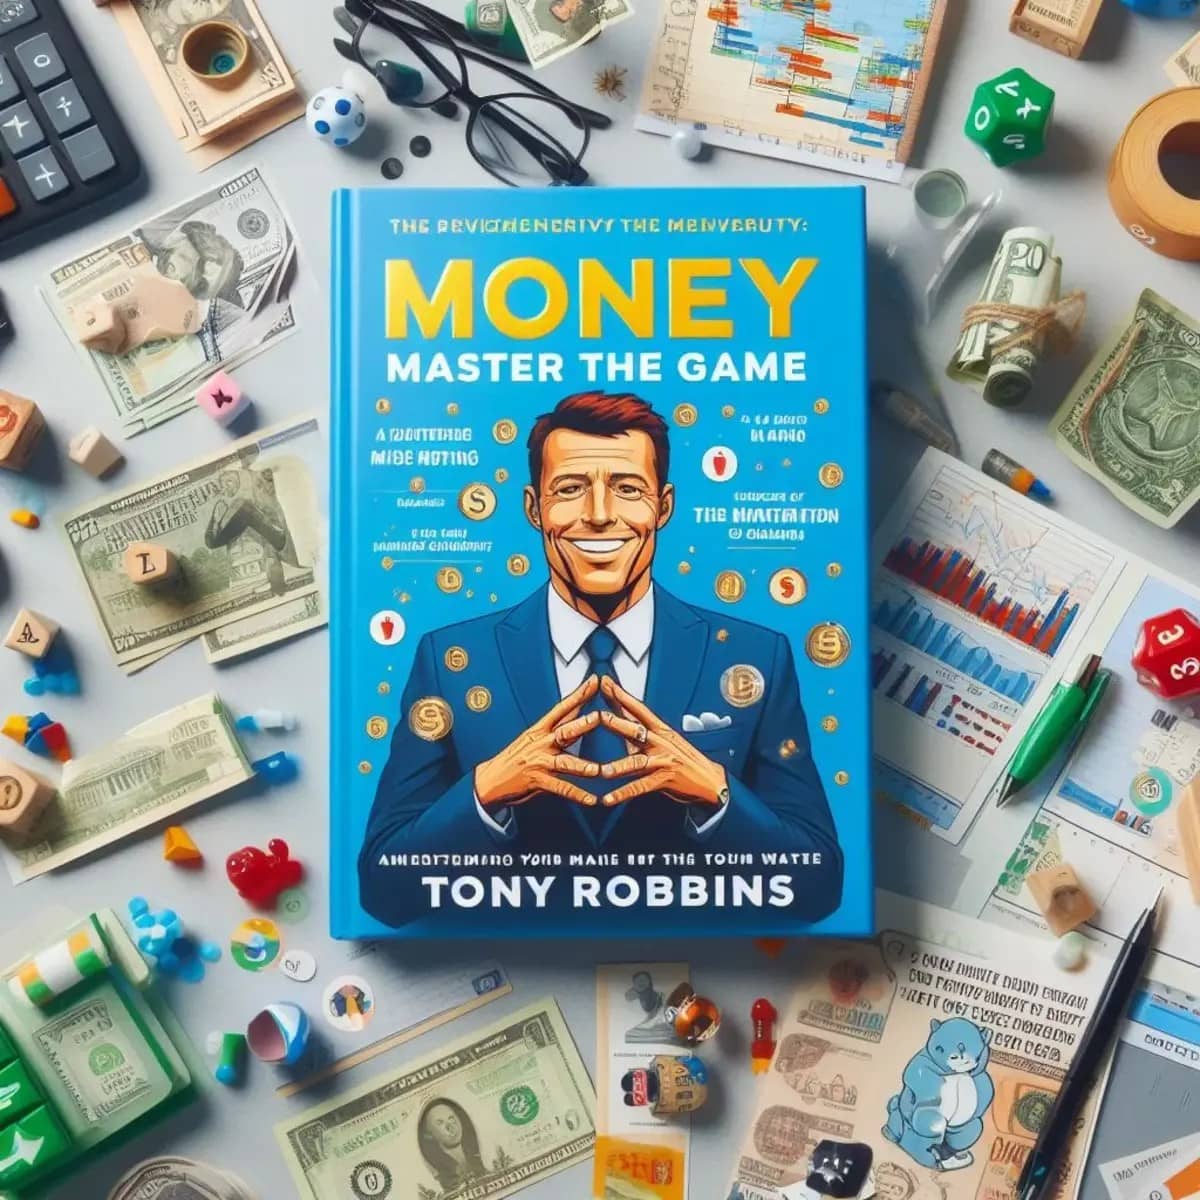 Unraveling Financial Mastery: A Summary of "Money Master The Game" by Tony Robbins